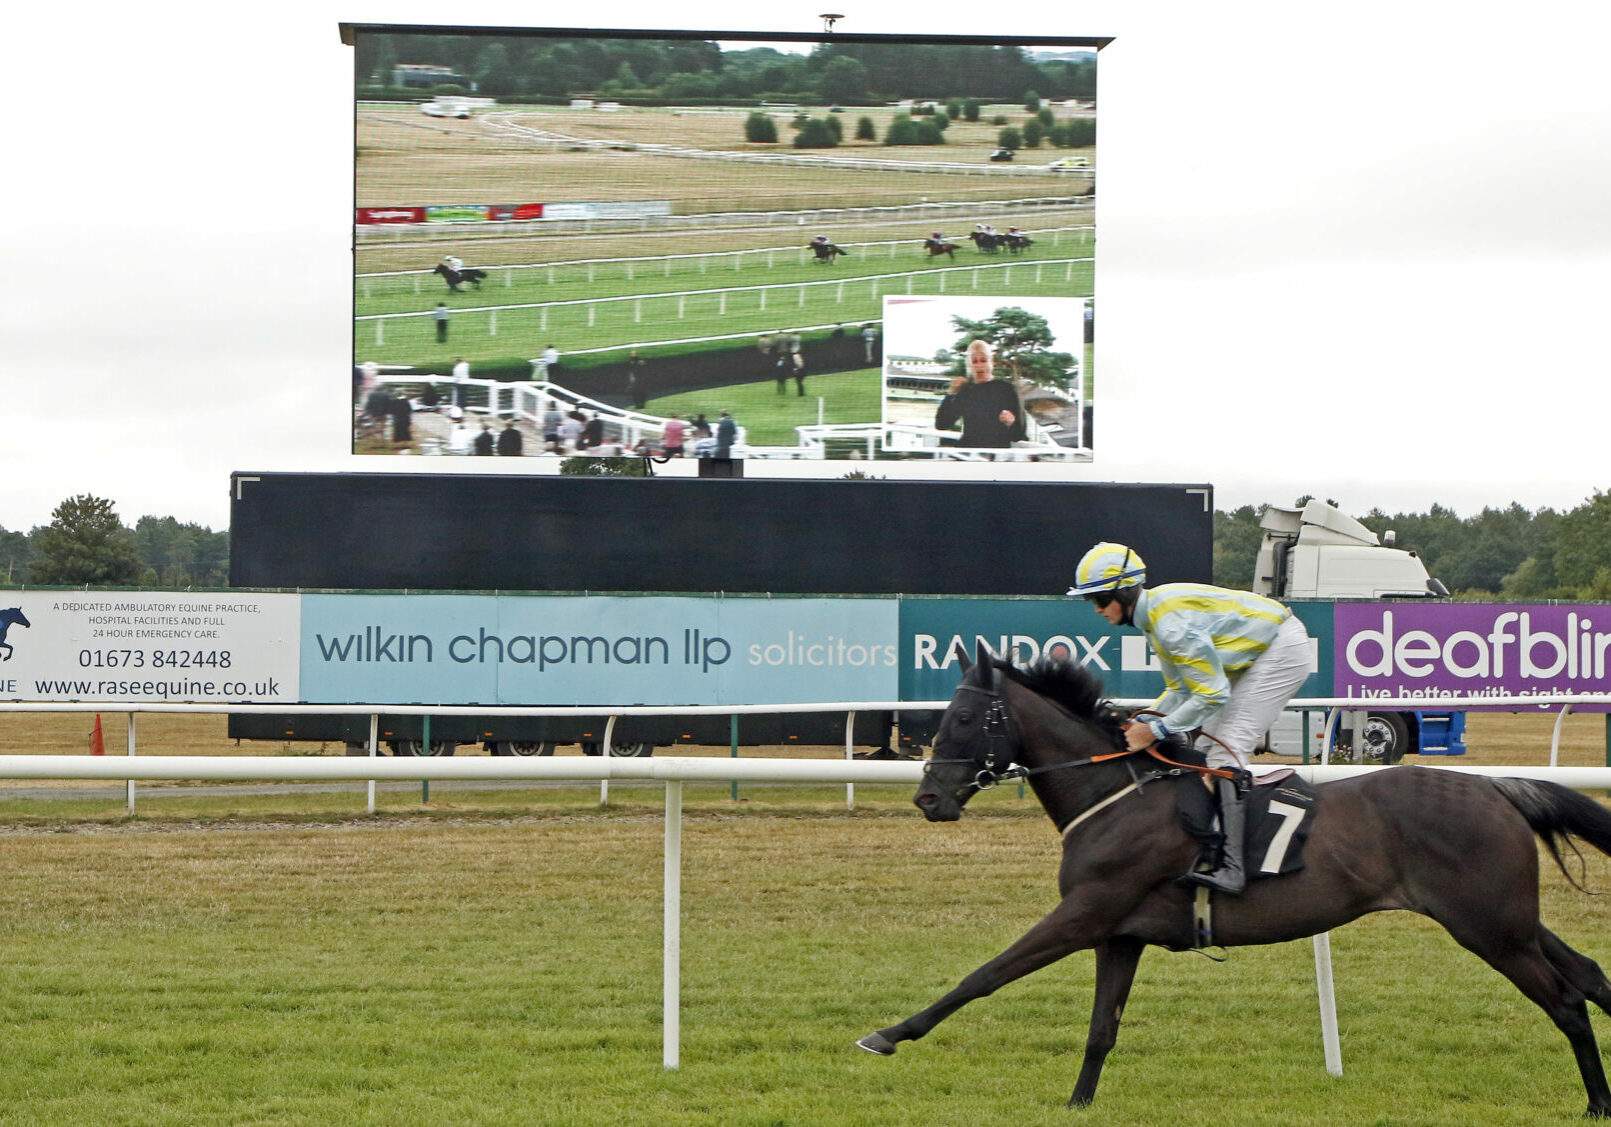 Racehorse and jockey galloping on a racecourse, with a large screen in the background featuring commentary in BSL.